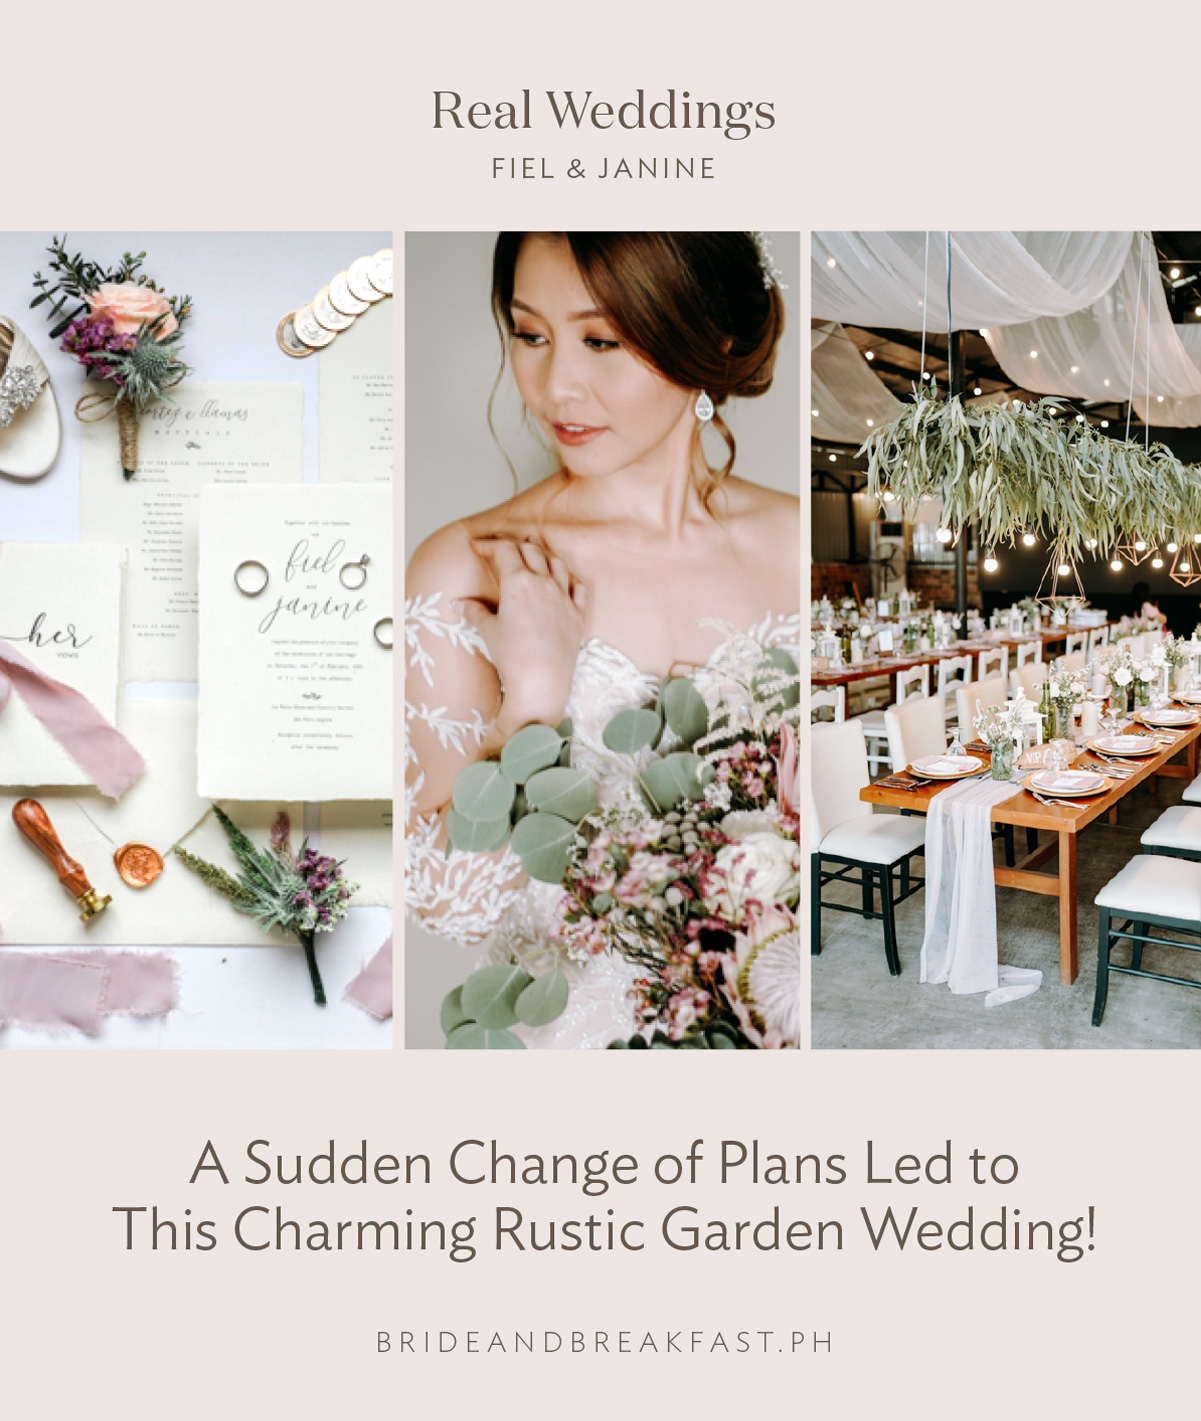 A Sudden Change of Plans Led to This Charming Rustic Garden Wedding!